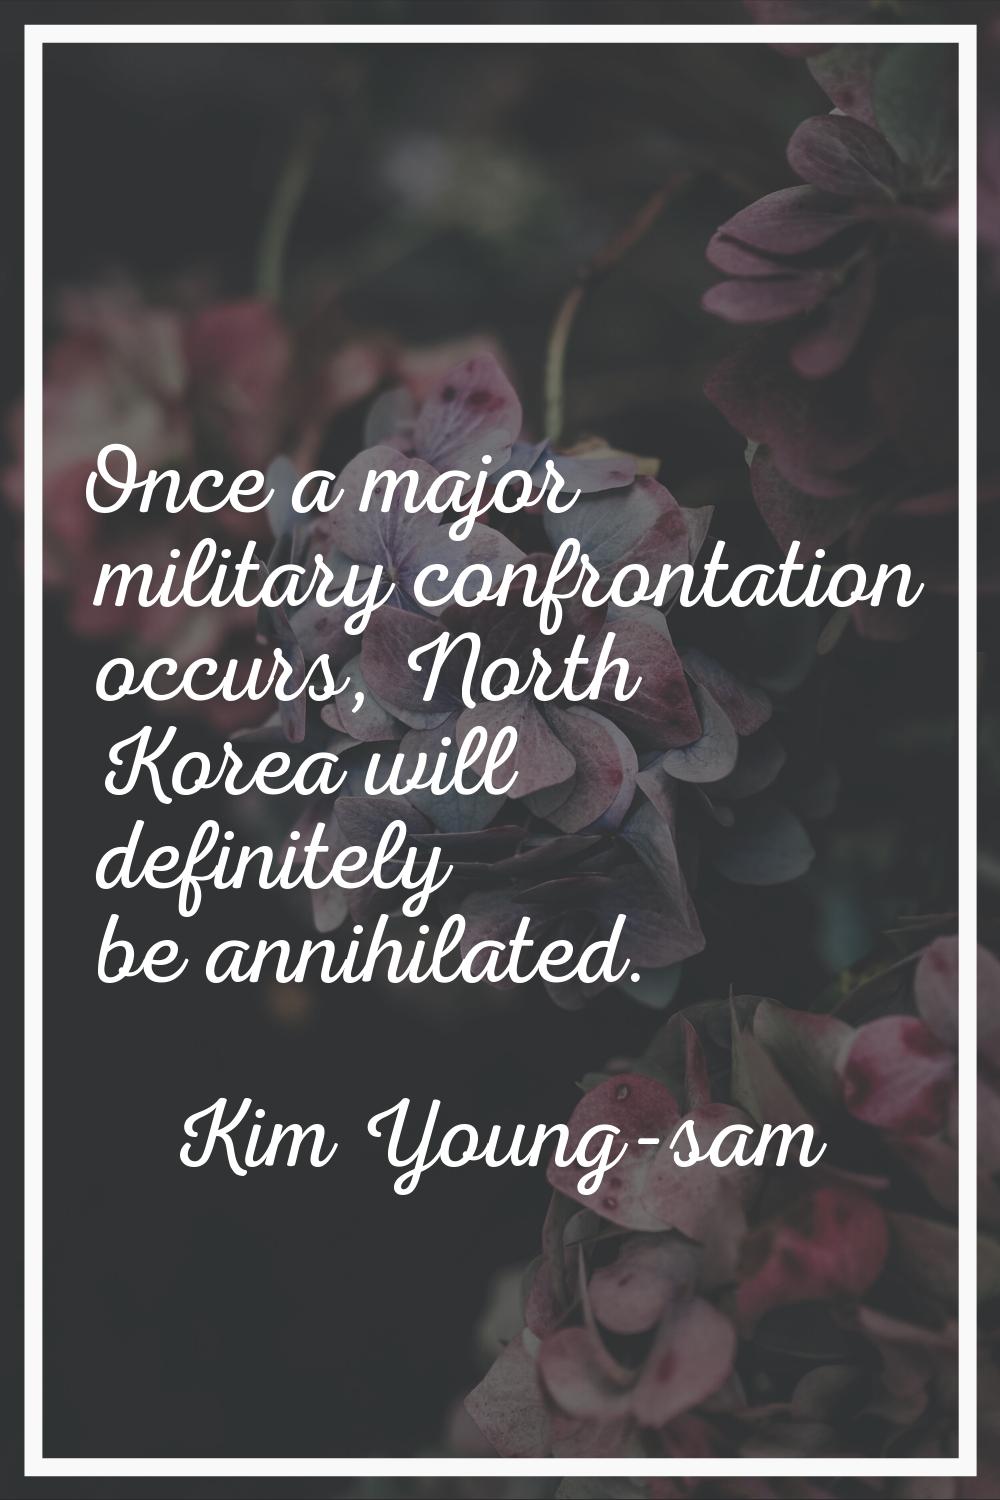 Once a major military confrontation occurs, North Korea will definitely be annihilated.